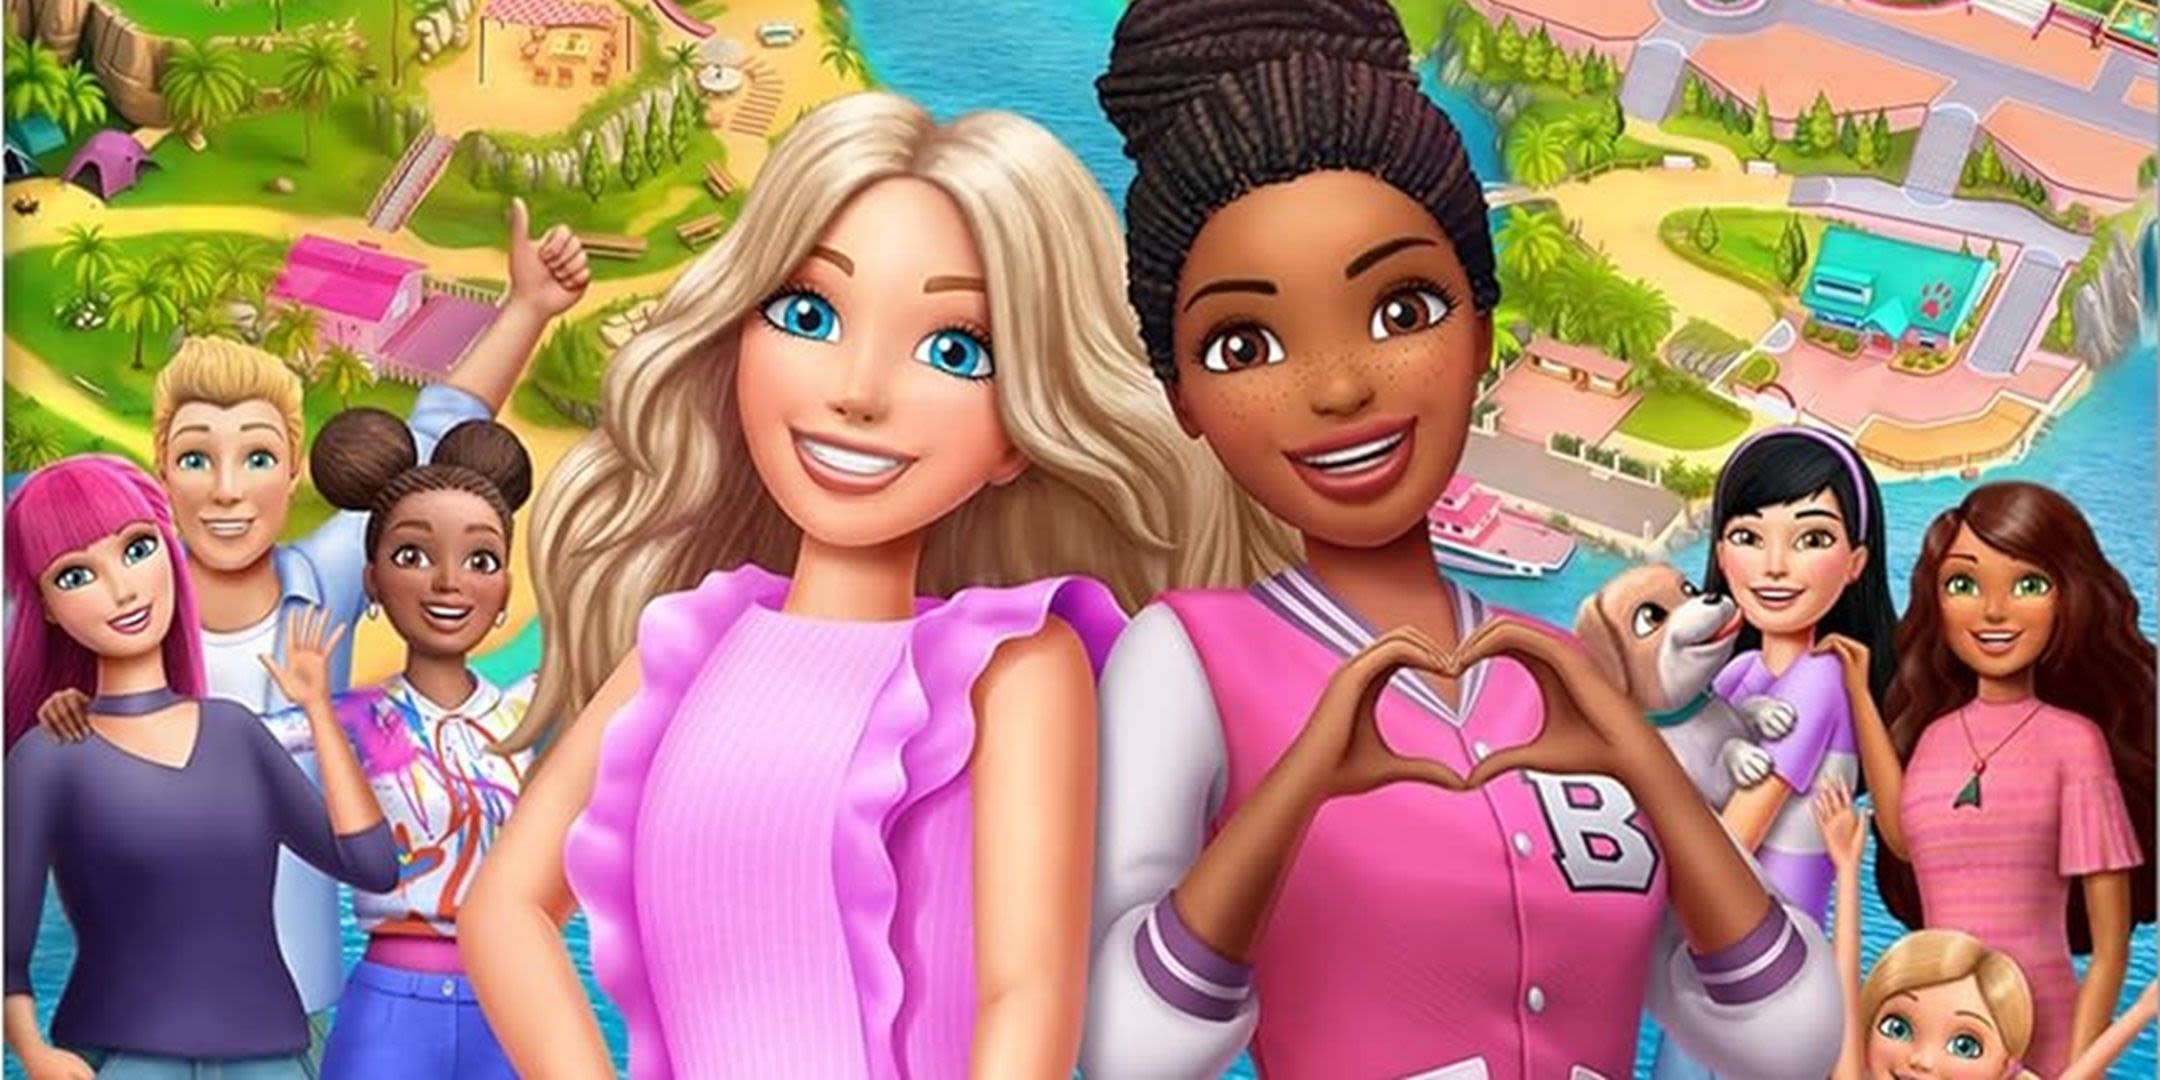 Mattel Releases First Barbie Console Video Game in Nearly a Decade